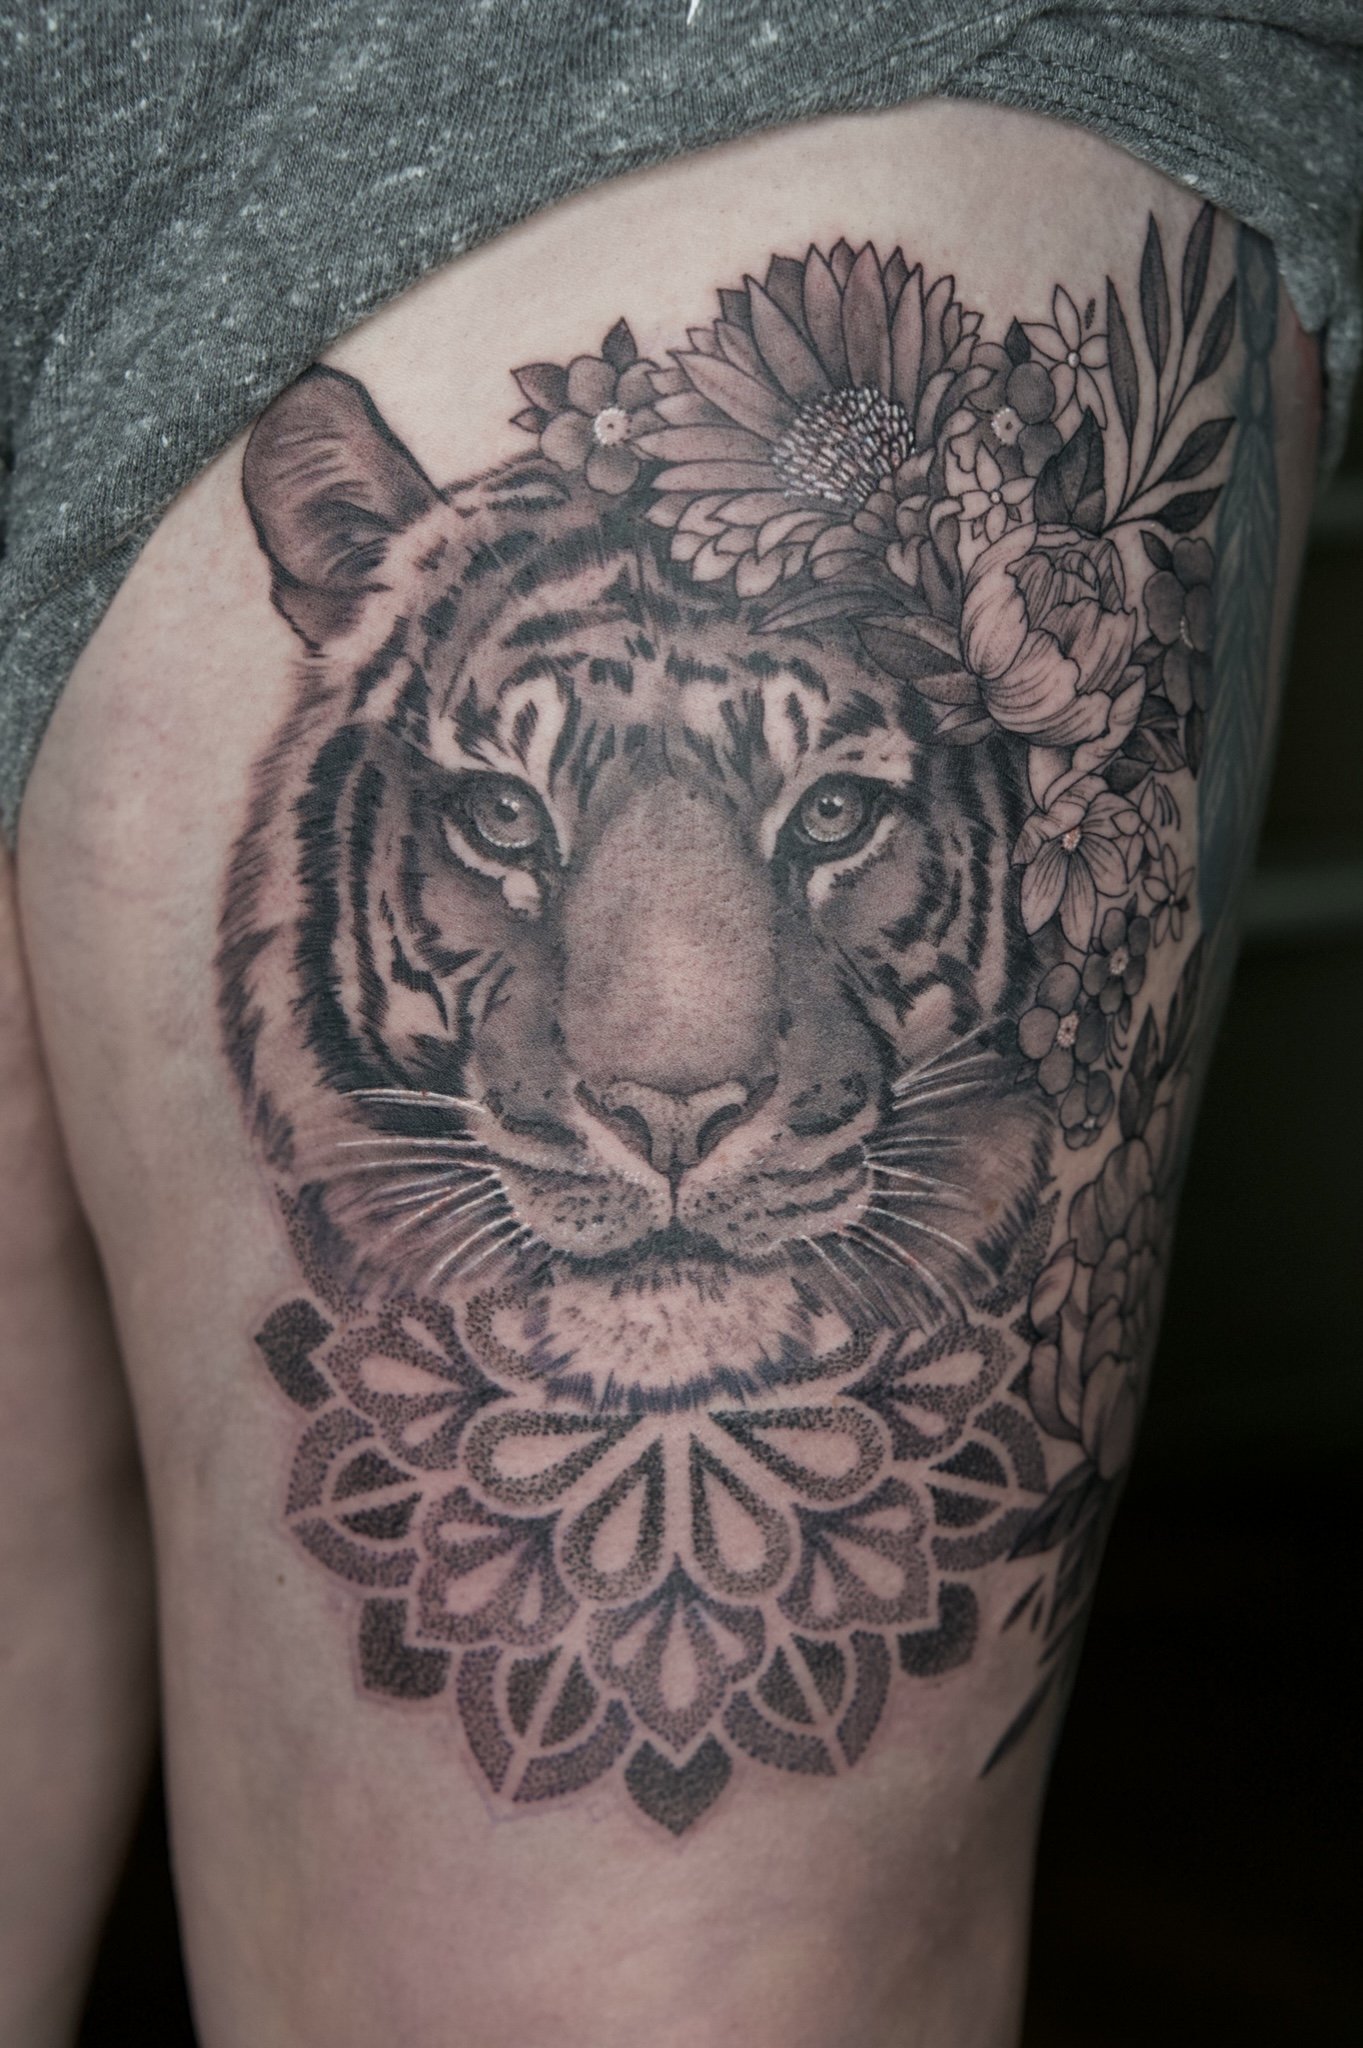 Geometric and dotwork tattoo artist Colchester Essex Black Hope Tattoo —  Black Hope Tattoo